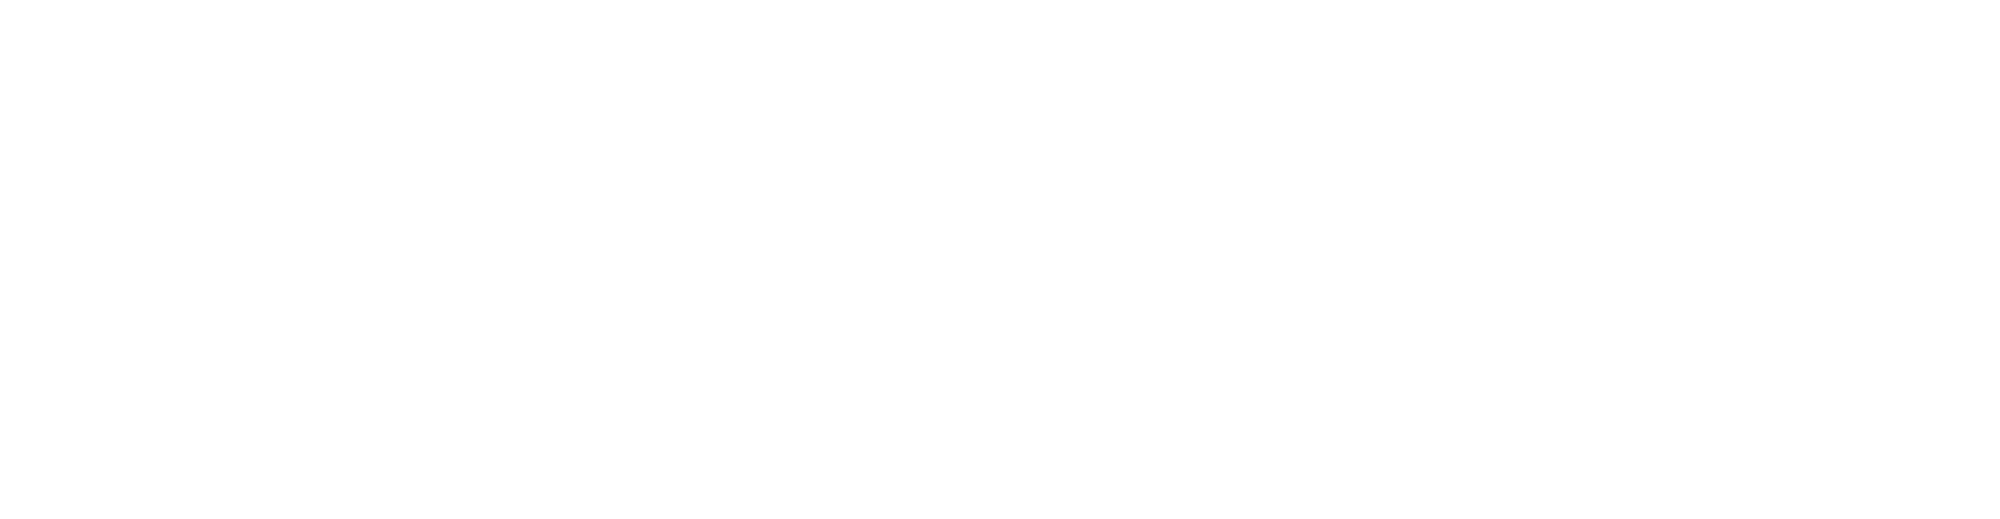 AAPA Conference 2024 Logo